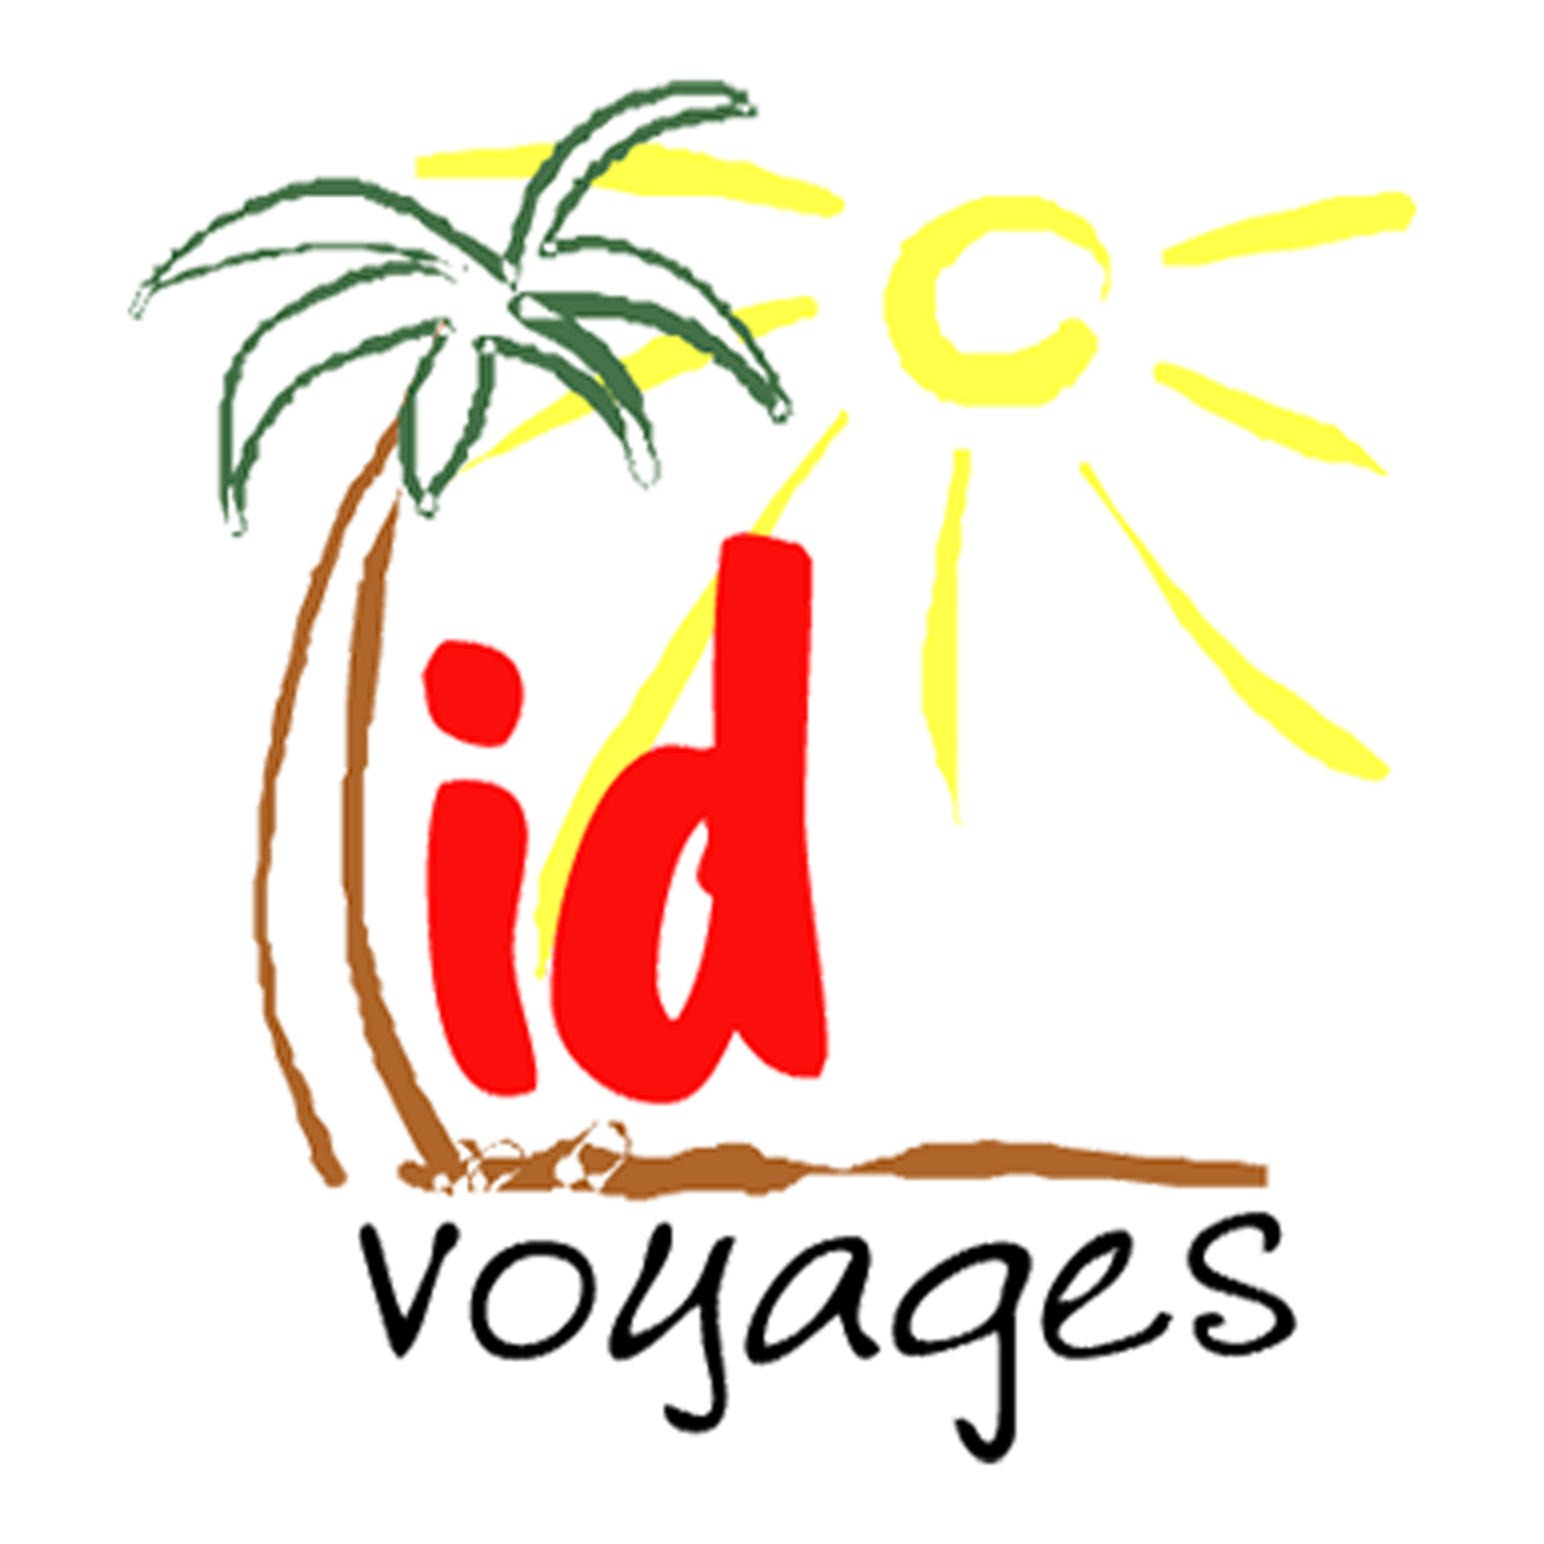 ID VOYAGES by Wild Dodo